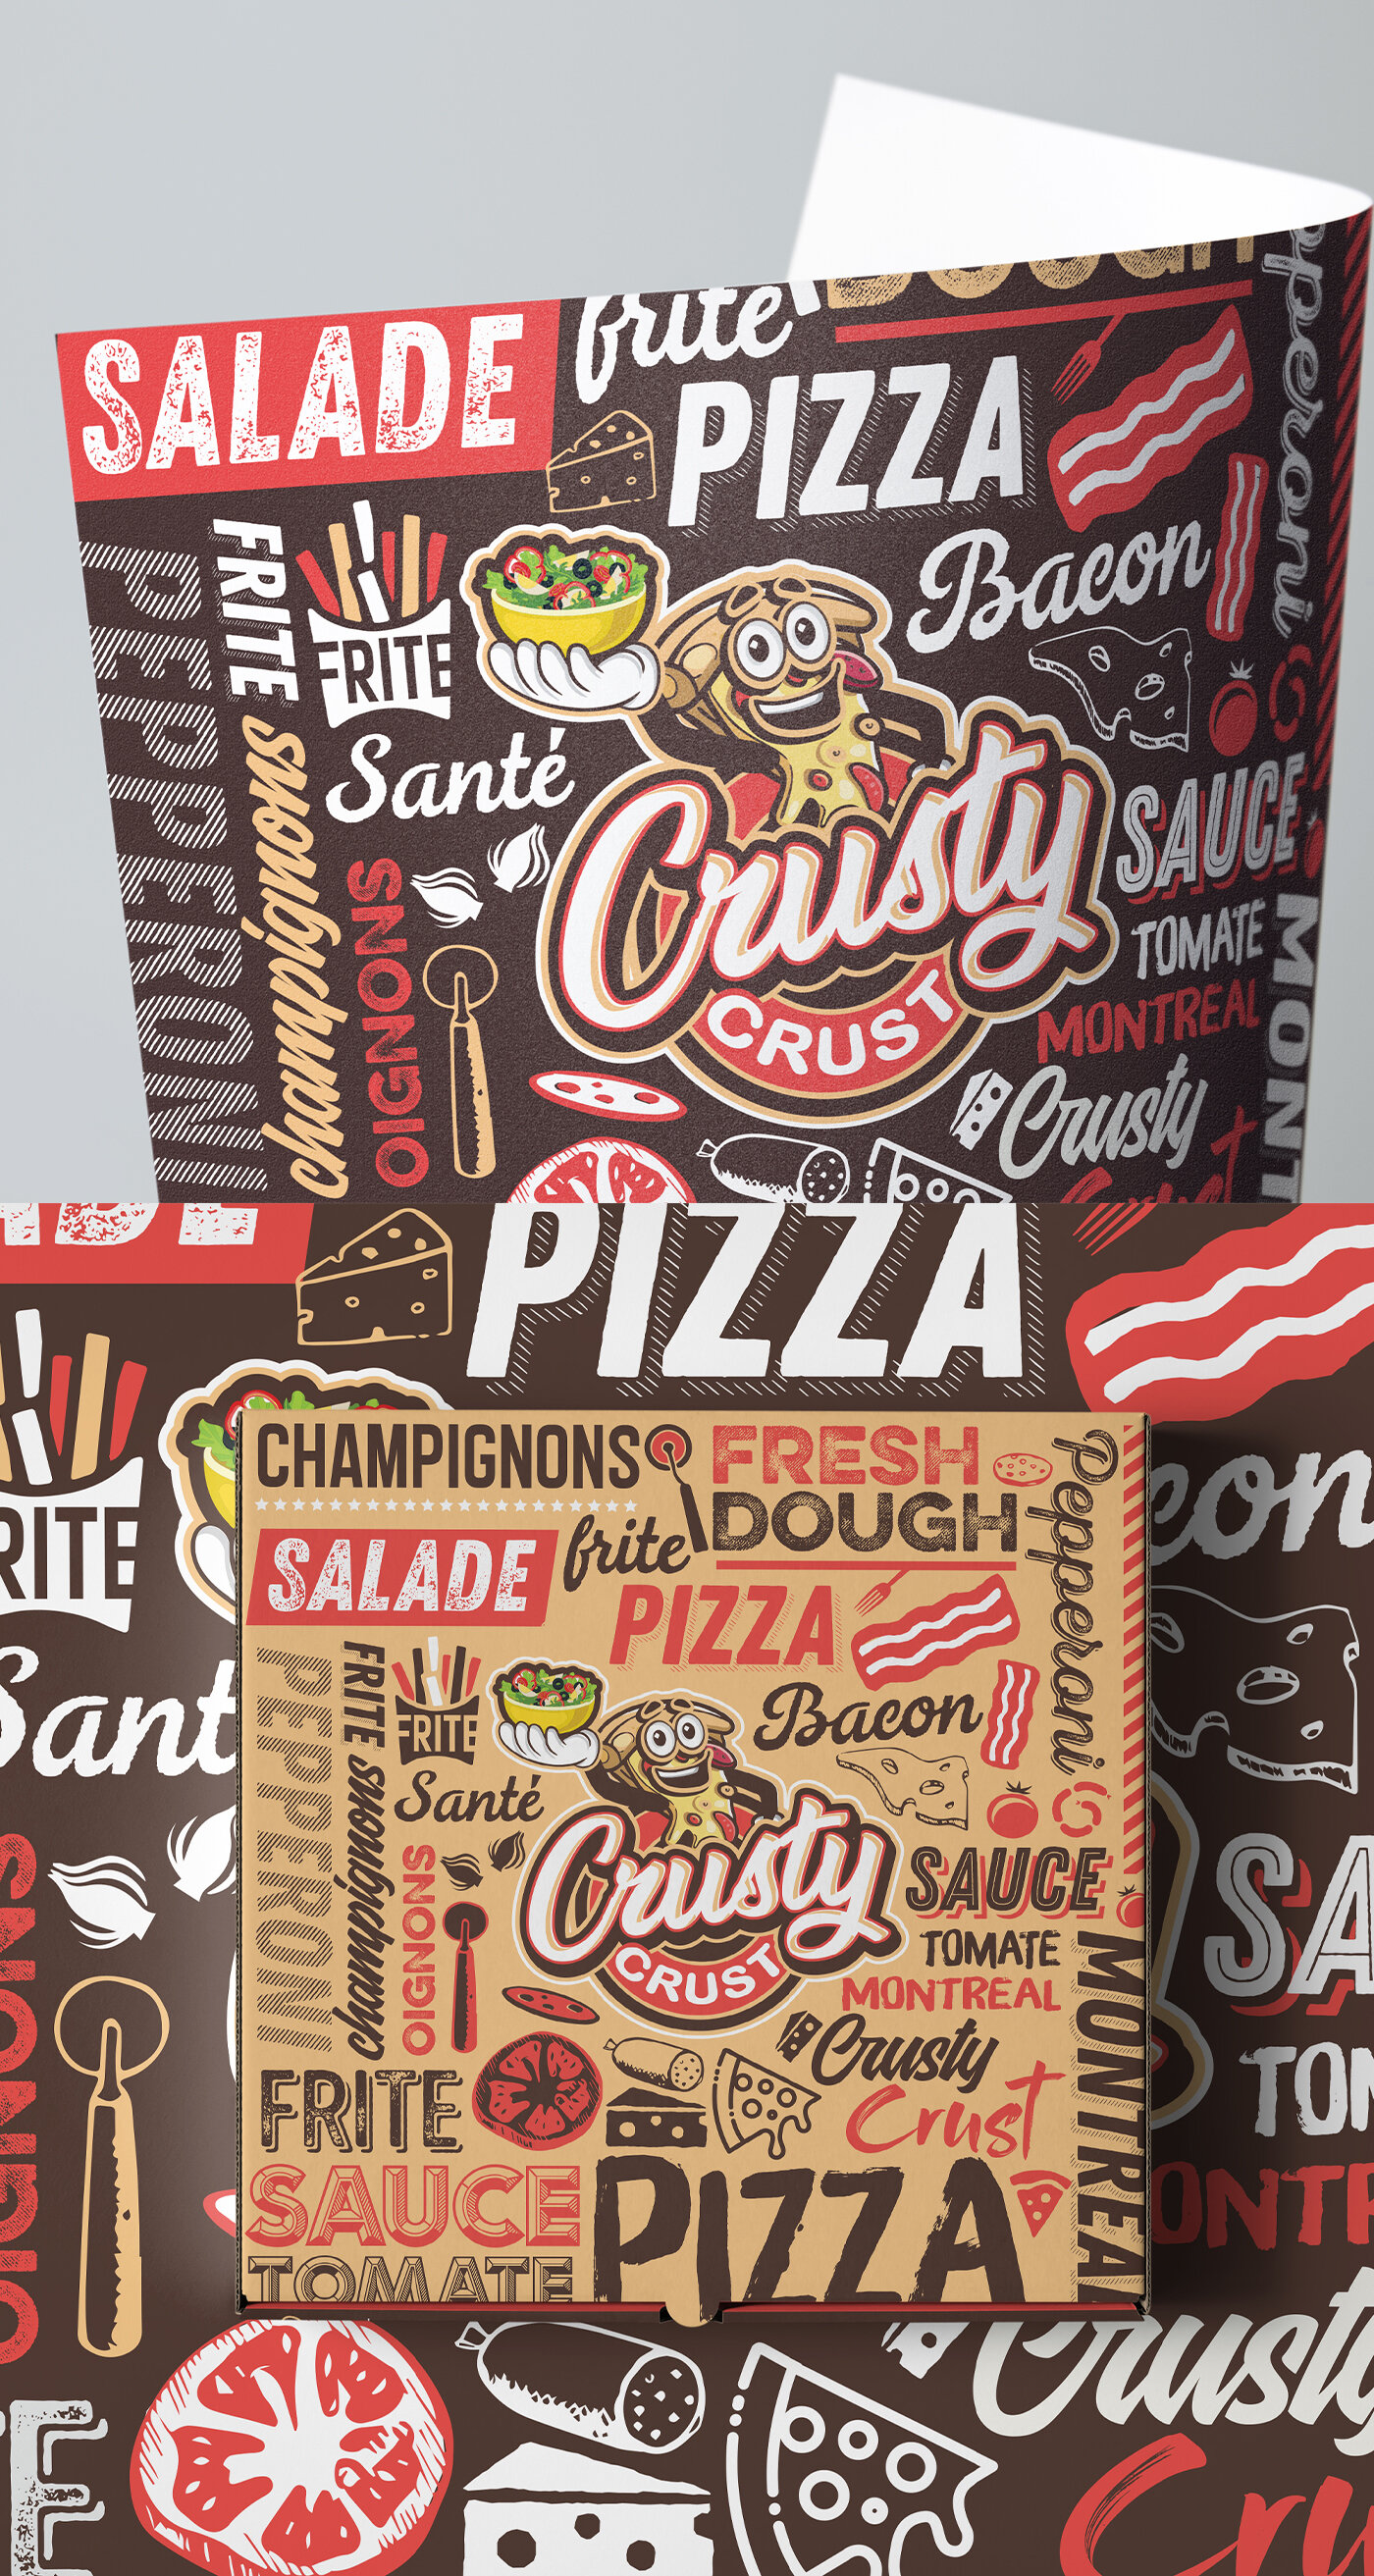 Anthology of Pizza Box Graphic Design, The Lower Crust